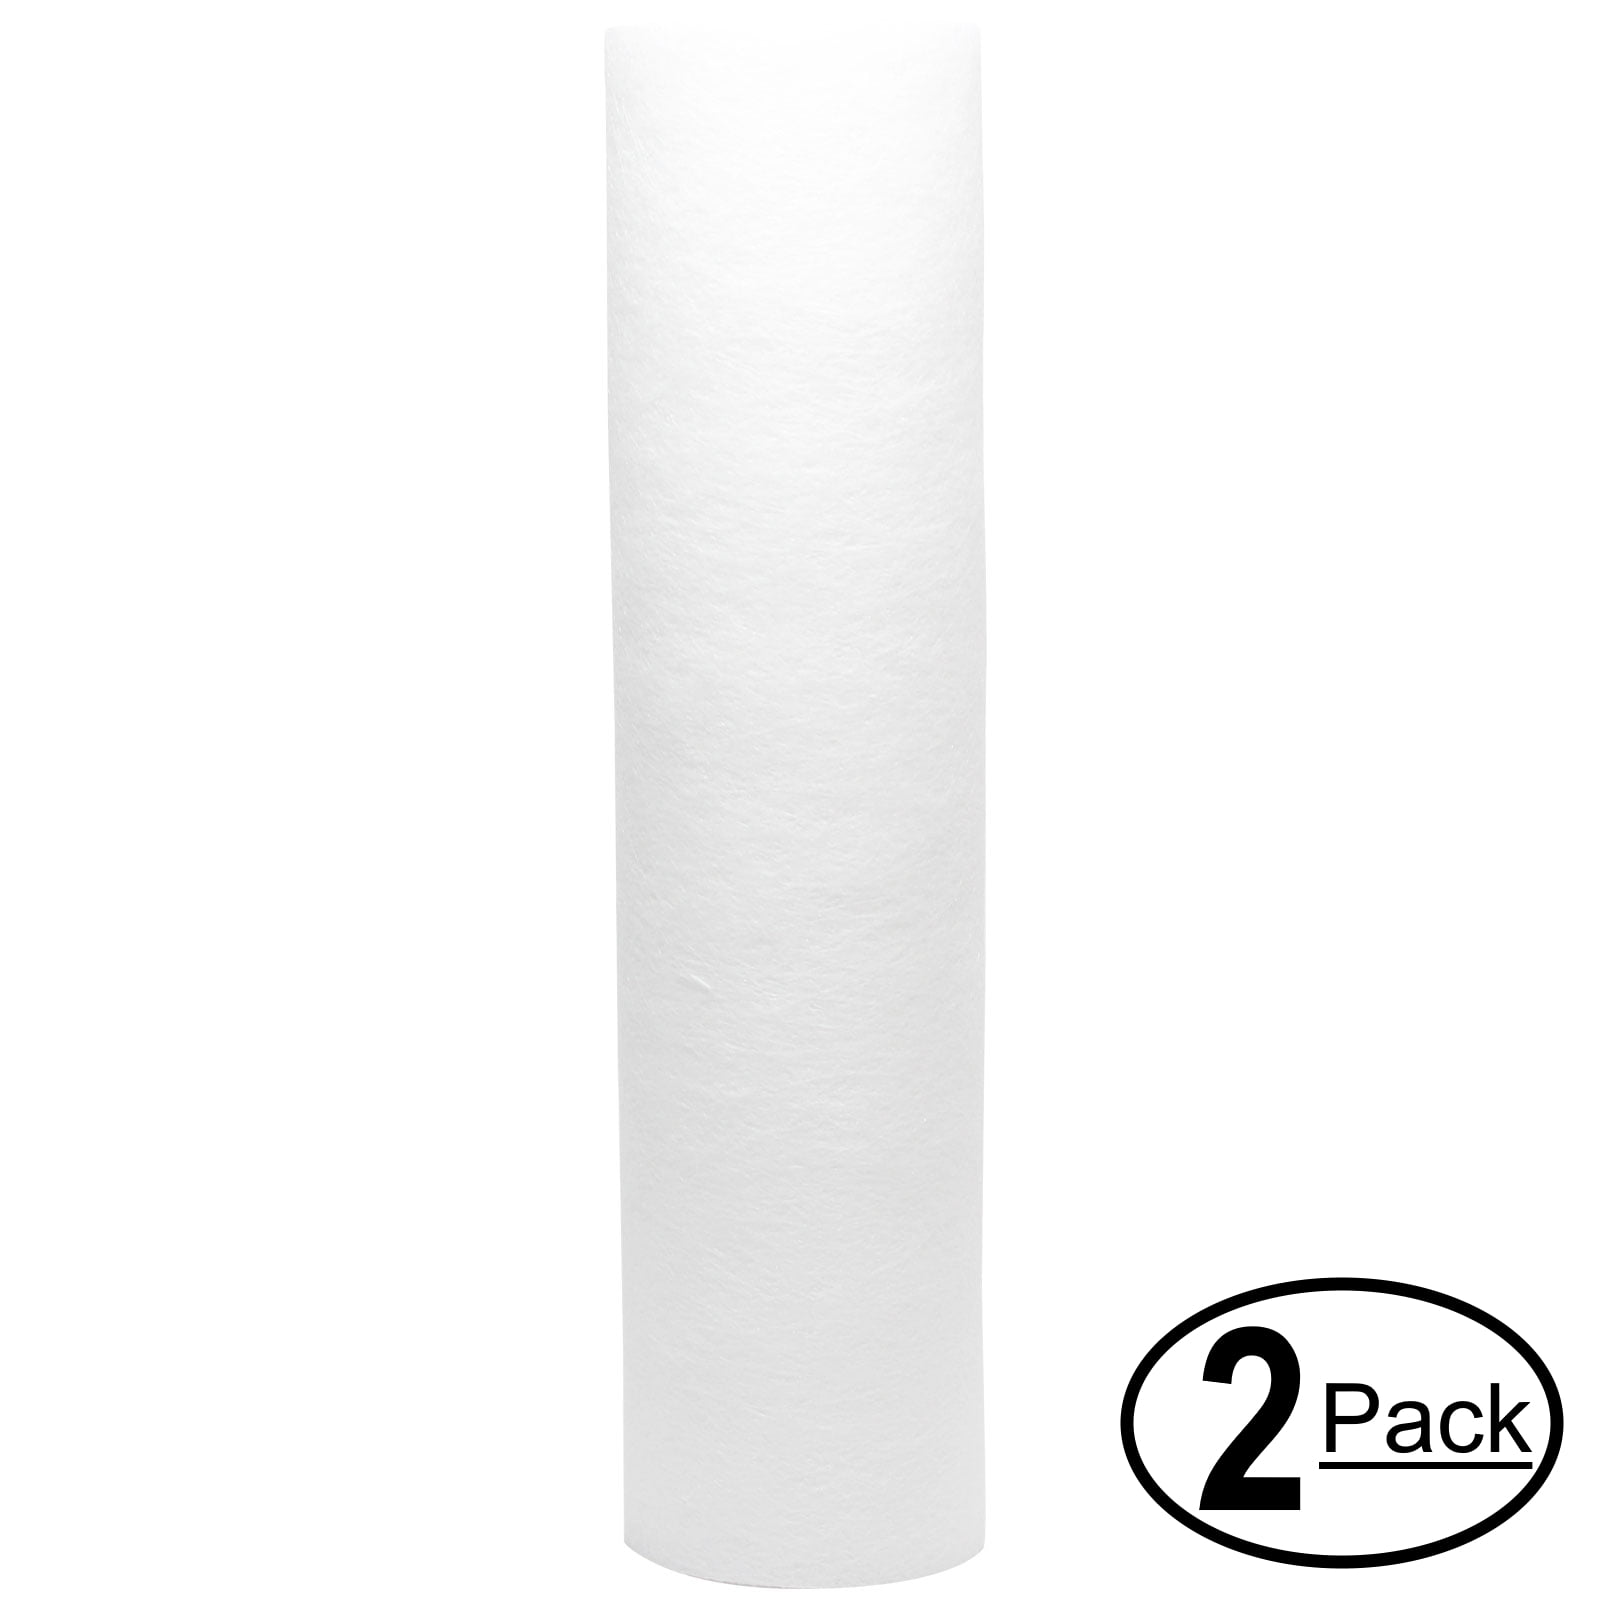 Denali Pure Brand 6-Pack Replacement for Crystal Quest CQE-CT-00109 Polypropylene Sediment Filter Universal 10-inch 5-Micron Cartridge Compatible with CRYSTAL QUEST Mega Triple Filter system 